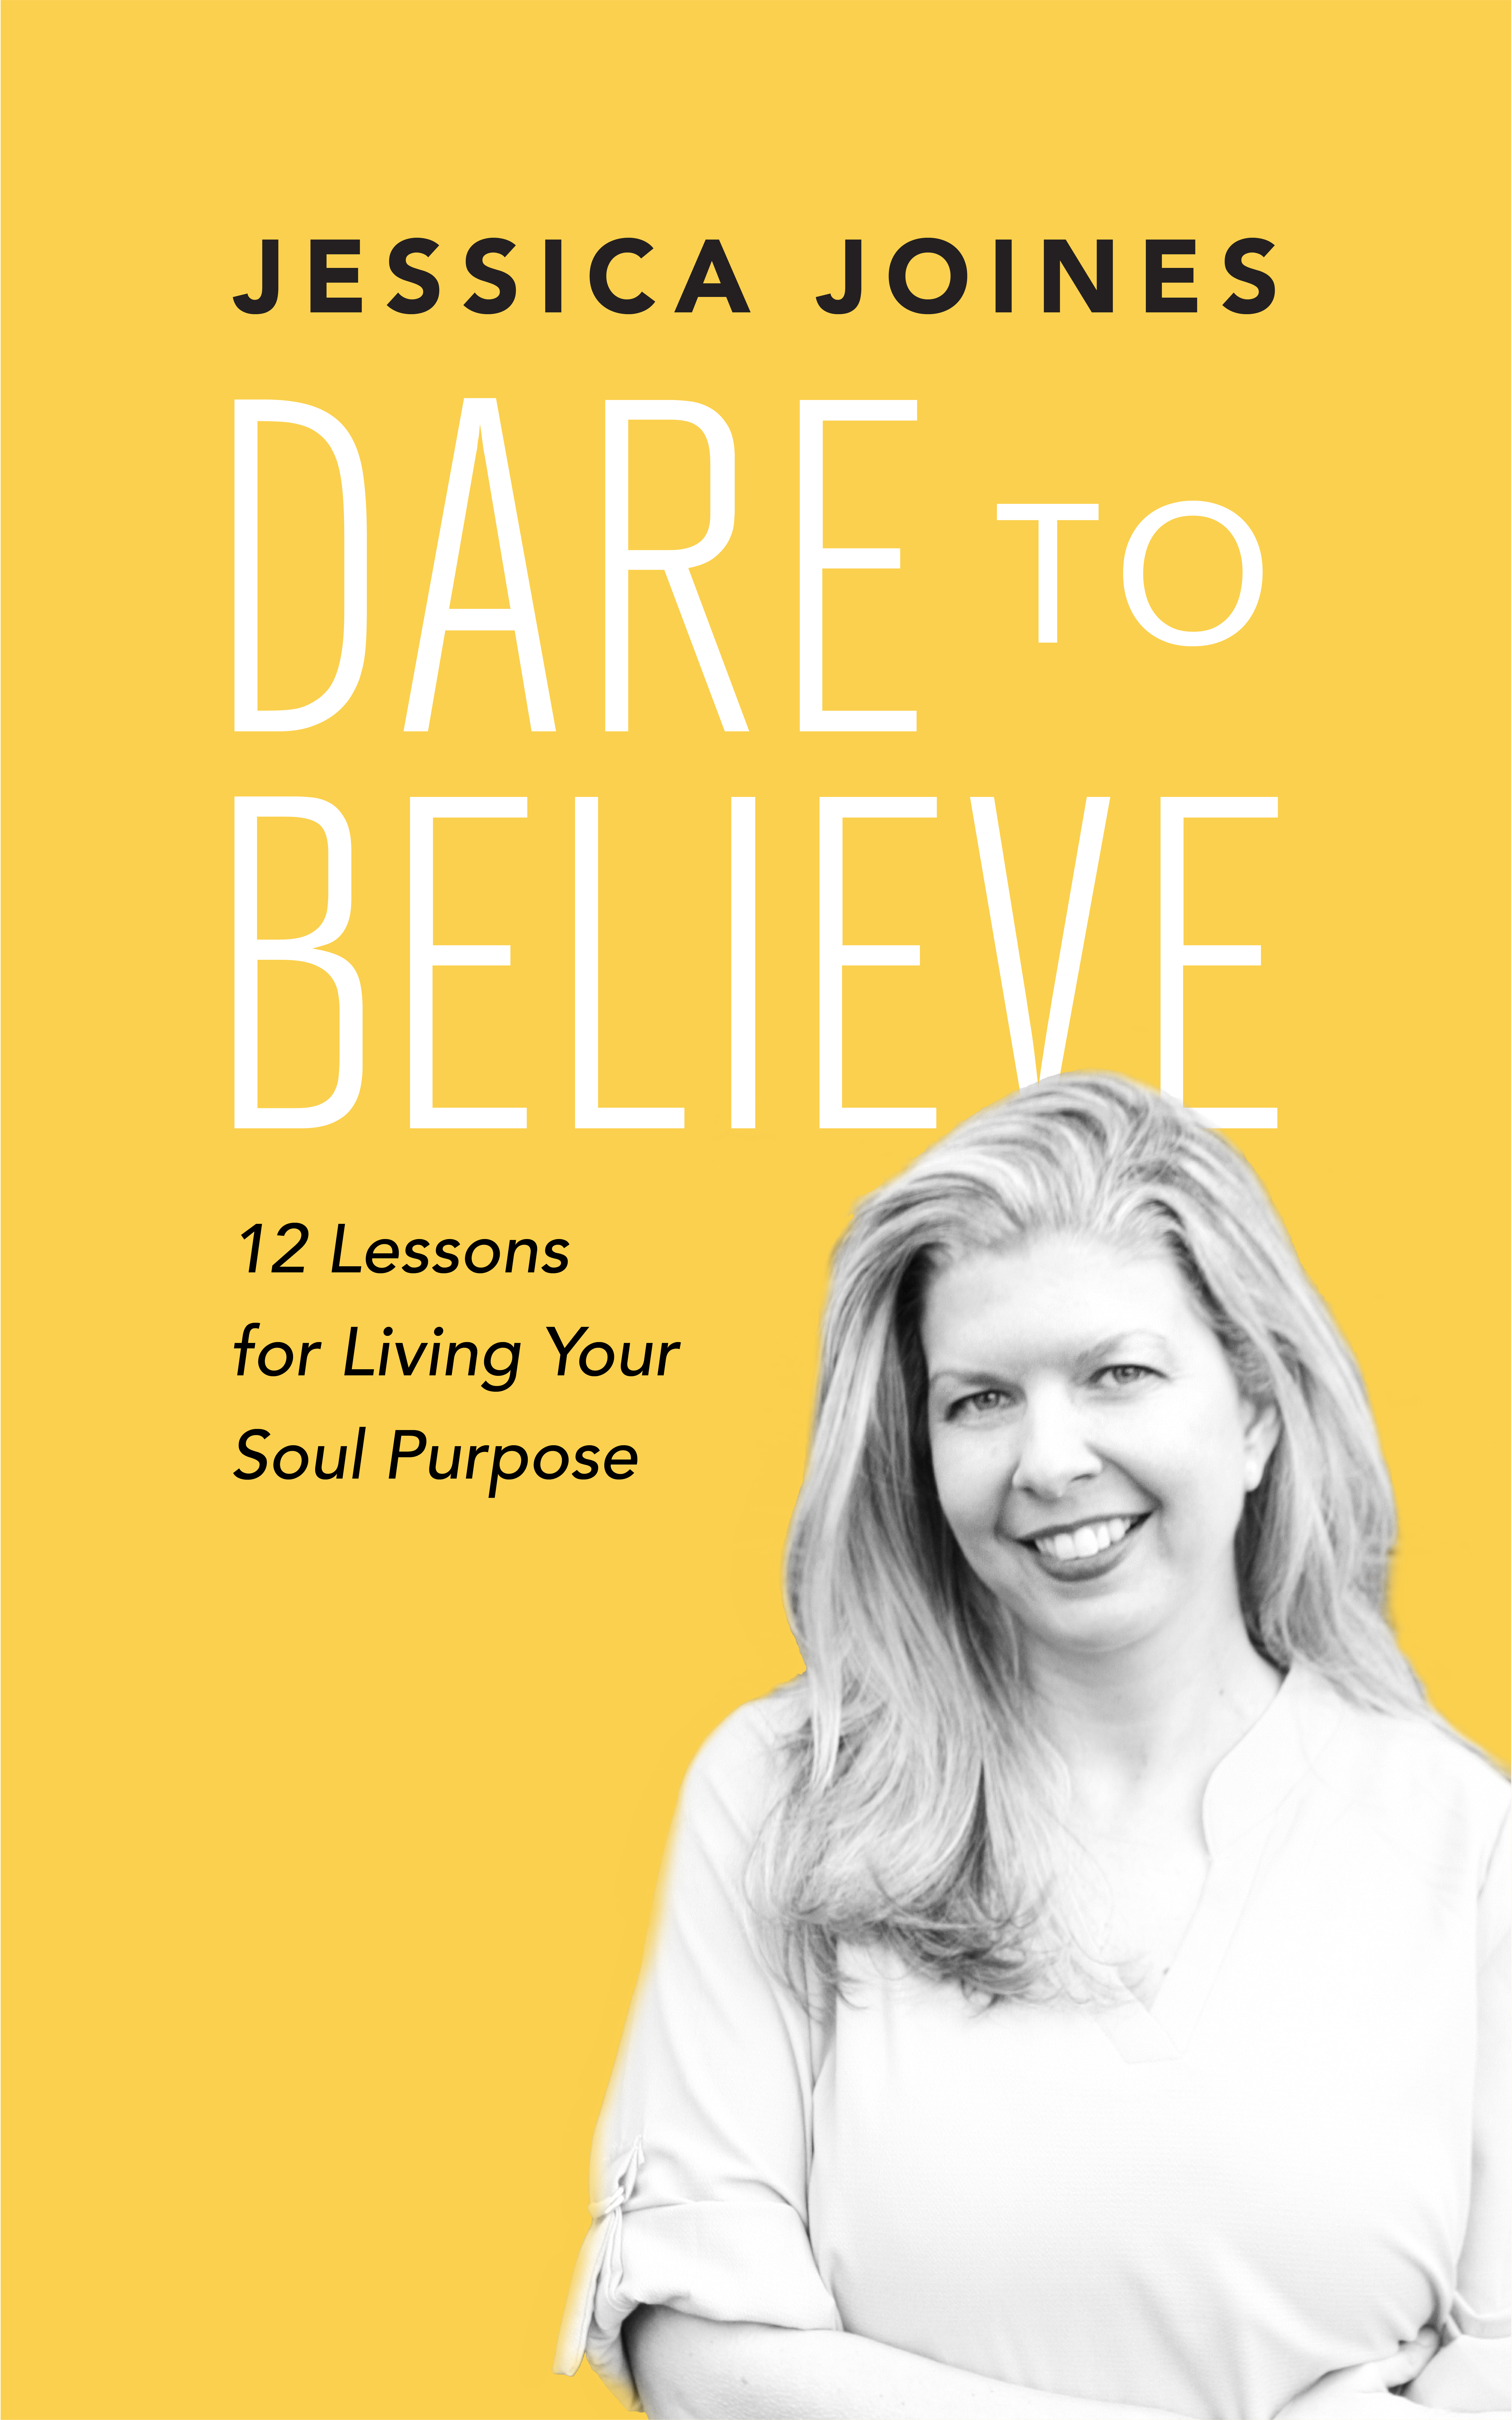 Dare to Believe Bestselling Book by Author Jessica Joines